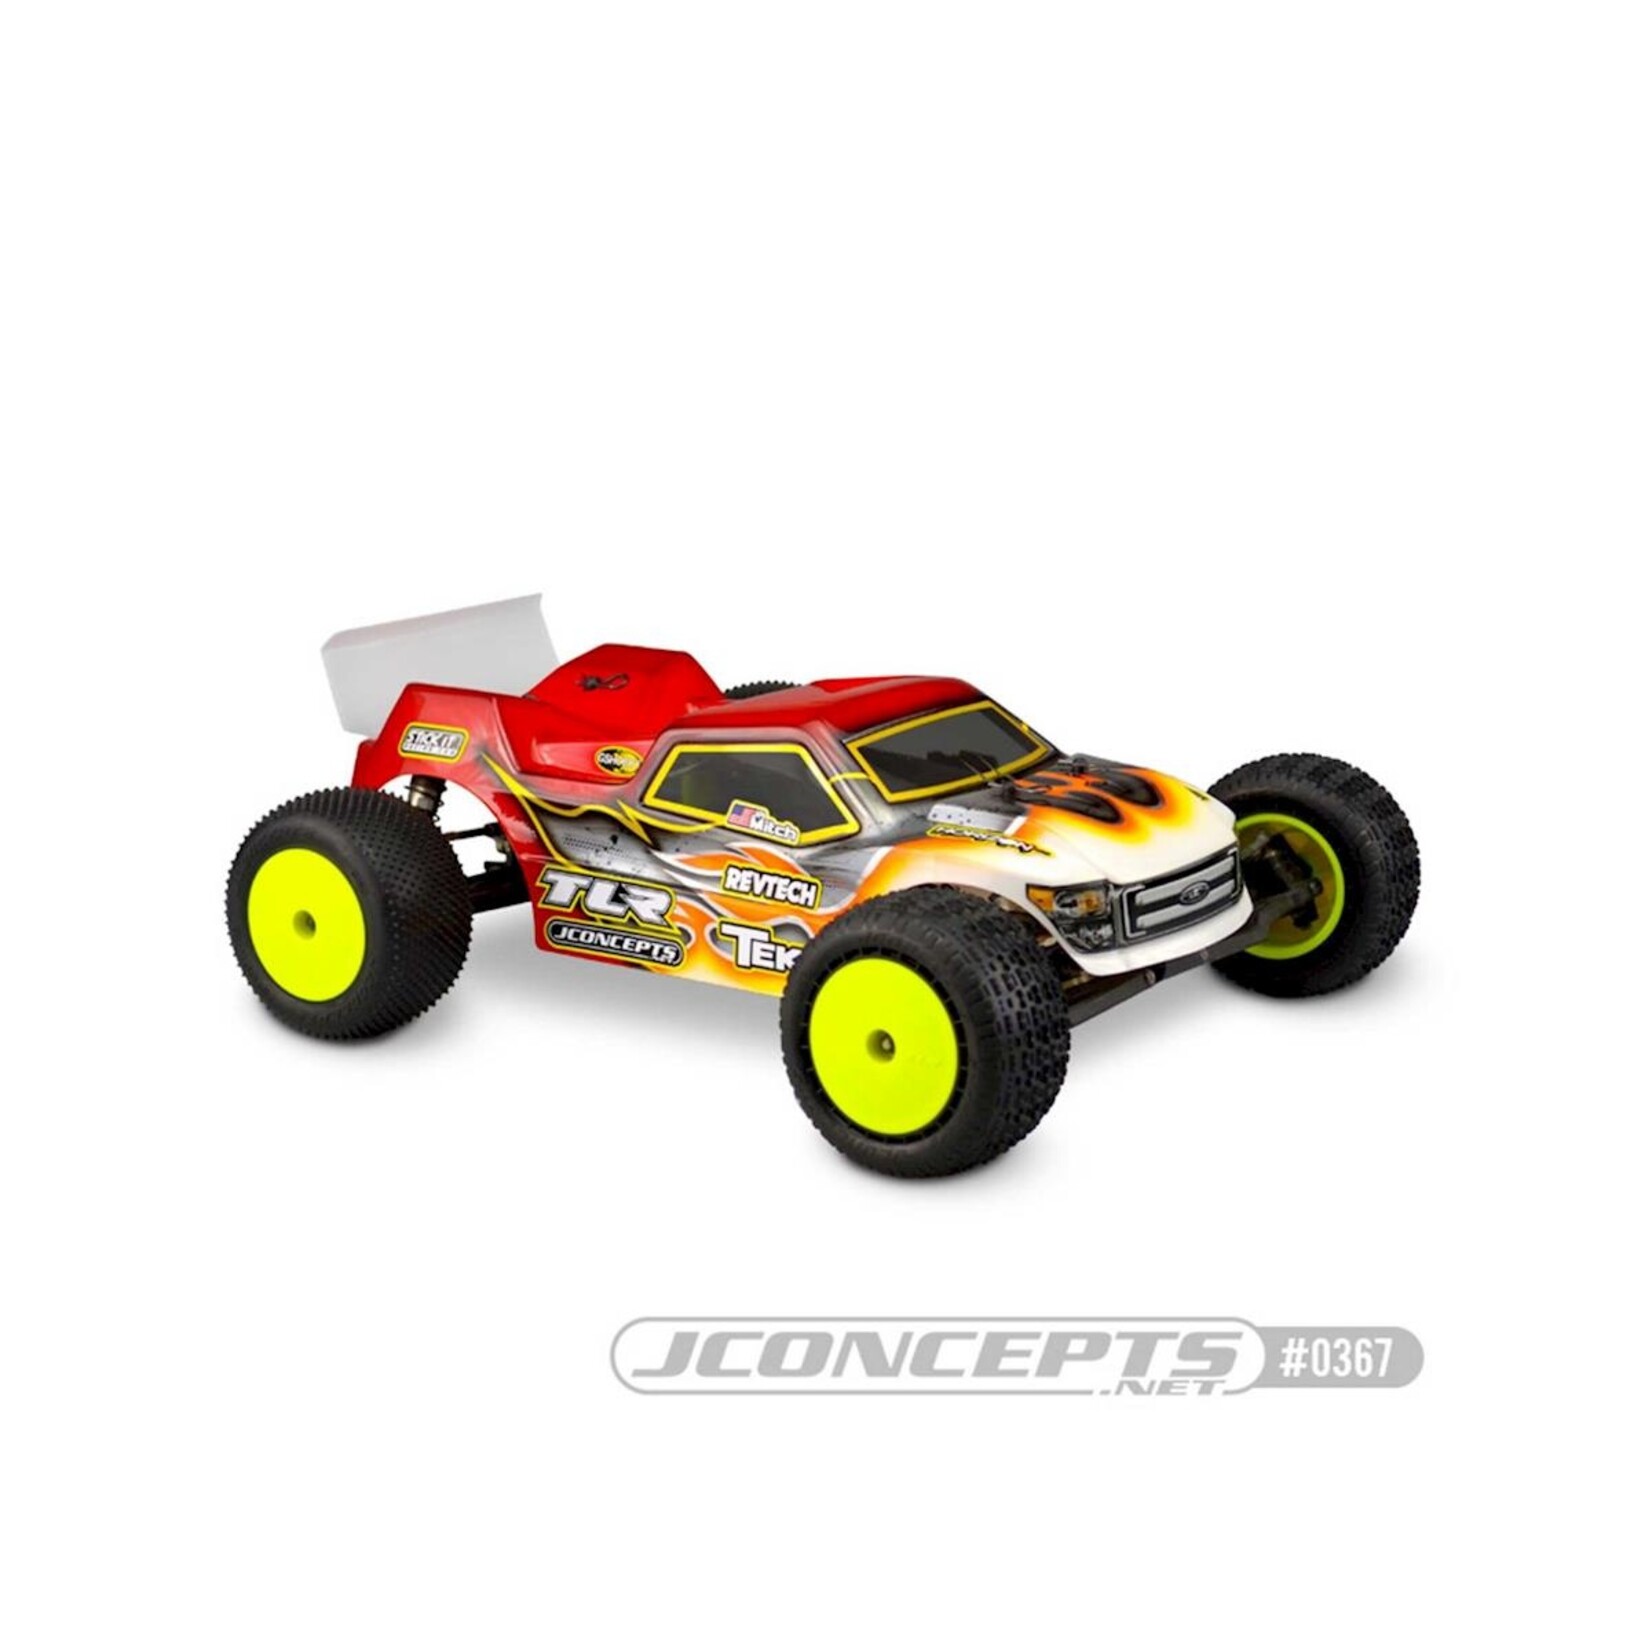 JConcepts JConcepts 22T 4.0 "Finnisher" Body (Clear) #0367